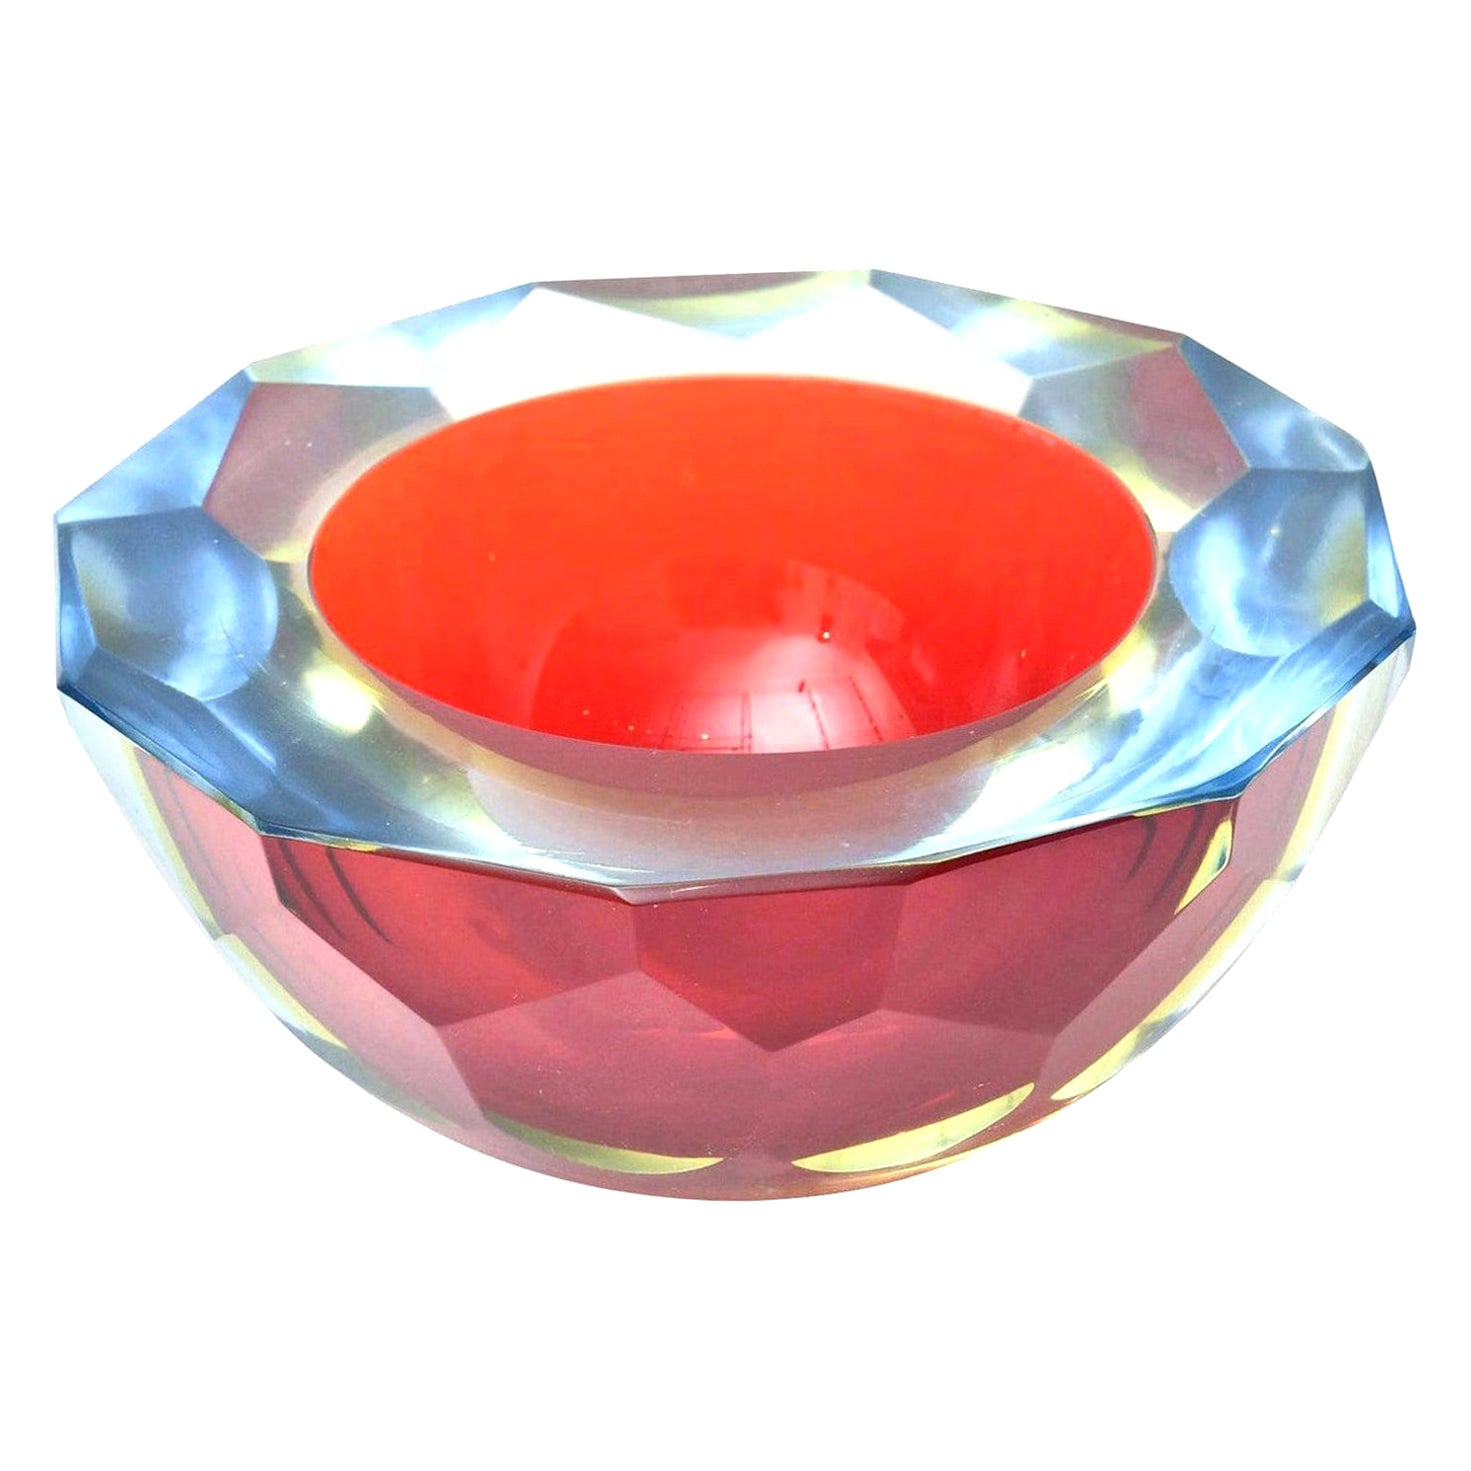 Murano Mandruzzato Vintage Red, Blue Sommerso Diamond Faceted Geode Glass Bowl